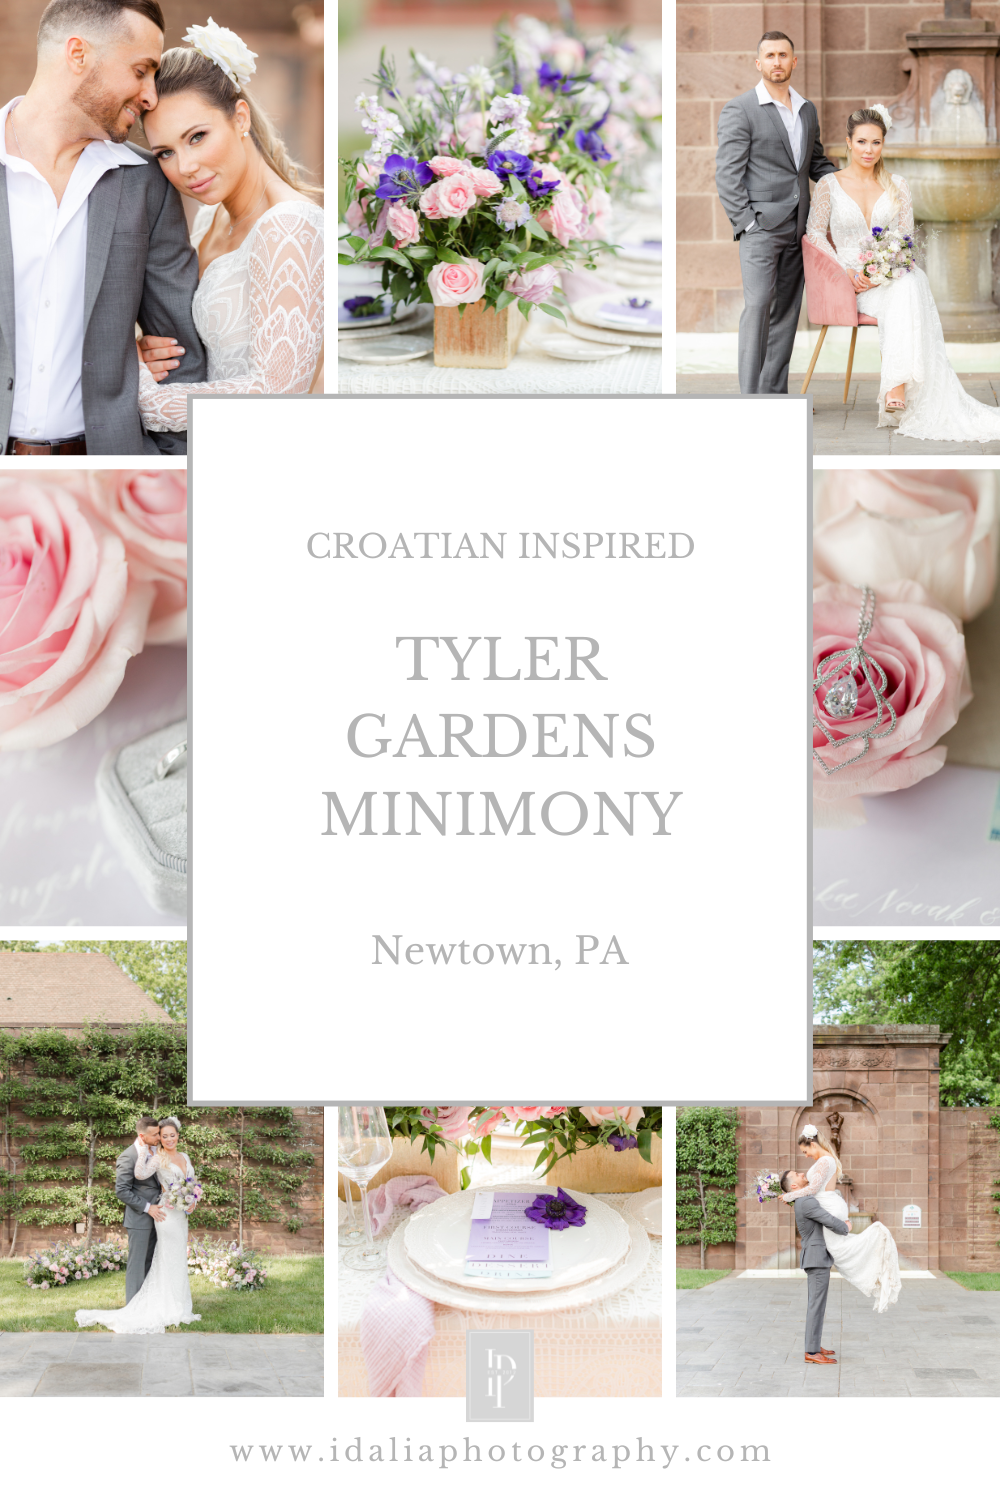 Wedding minimony at Tyler Gardens inspired by Croatian heritage and traditions planned by Dee Kay Events, featured on Destination I Do